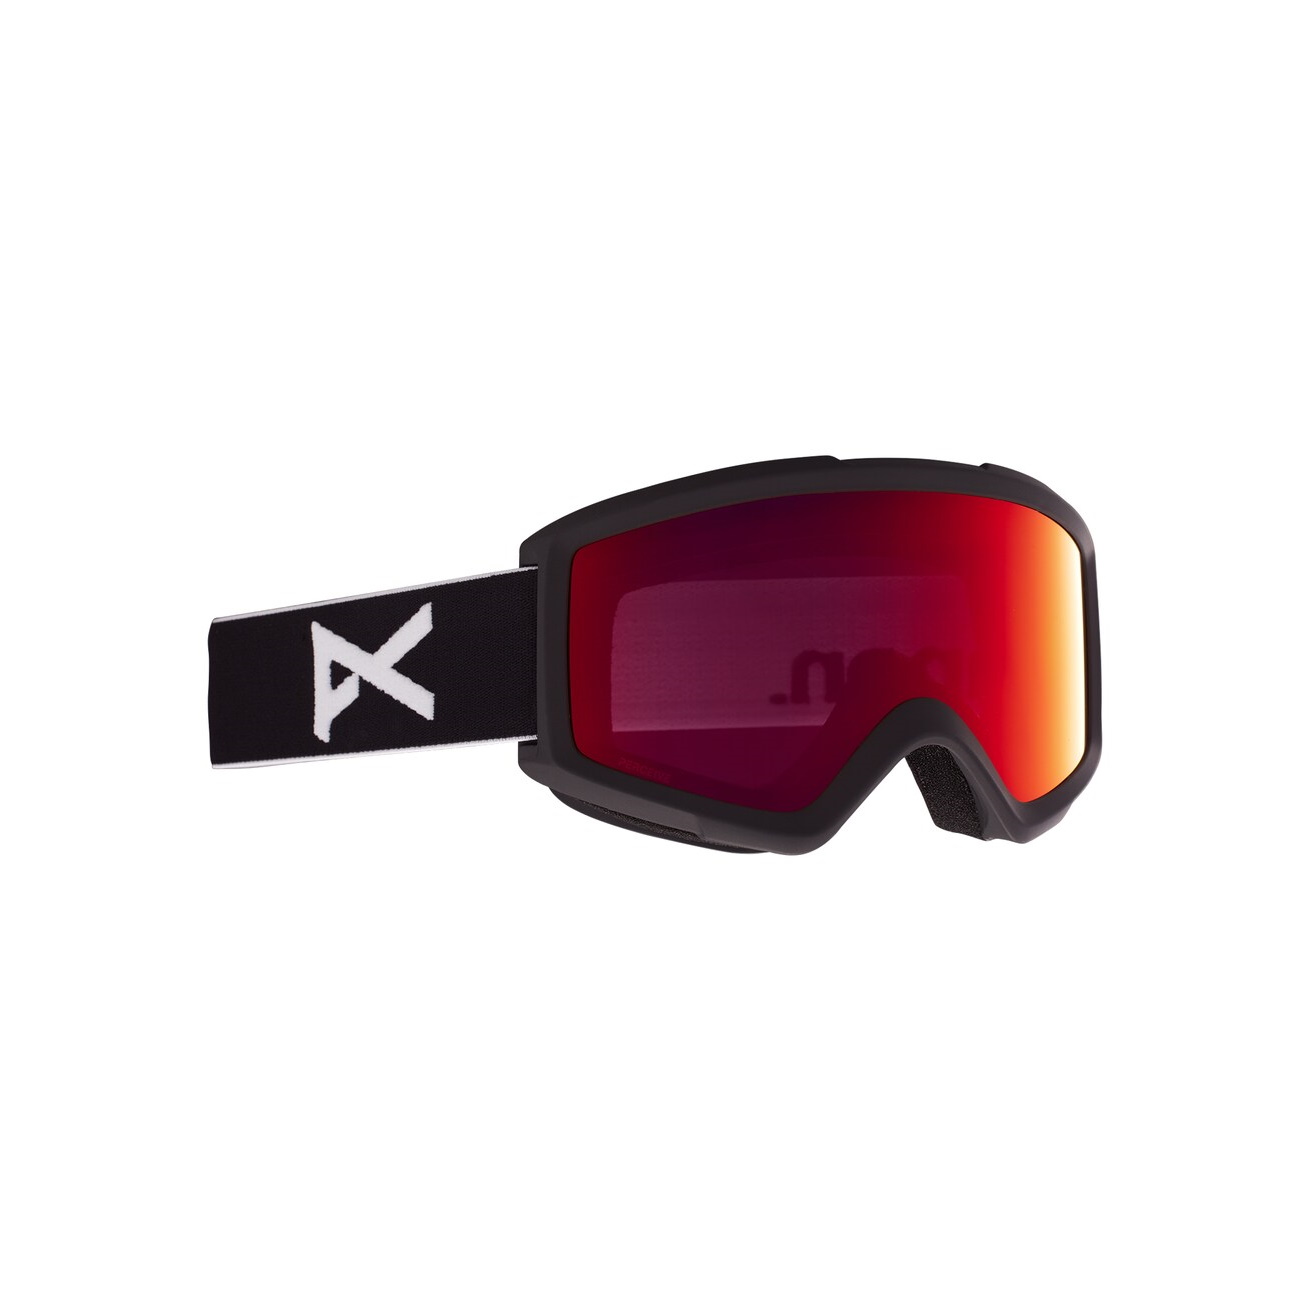 Helix 2.0 Goggles PERCEIVE + Spare Lens Black/Prcv Sun Red